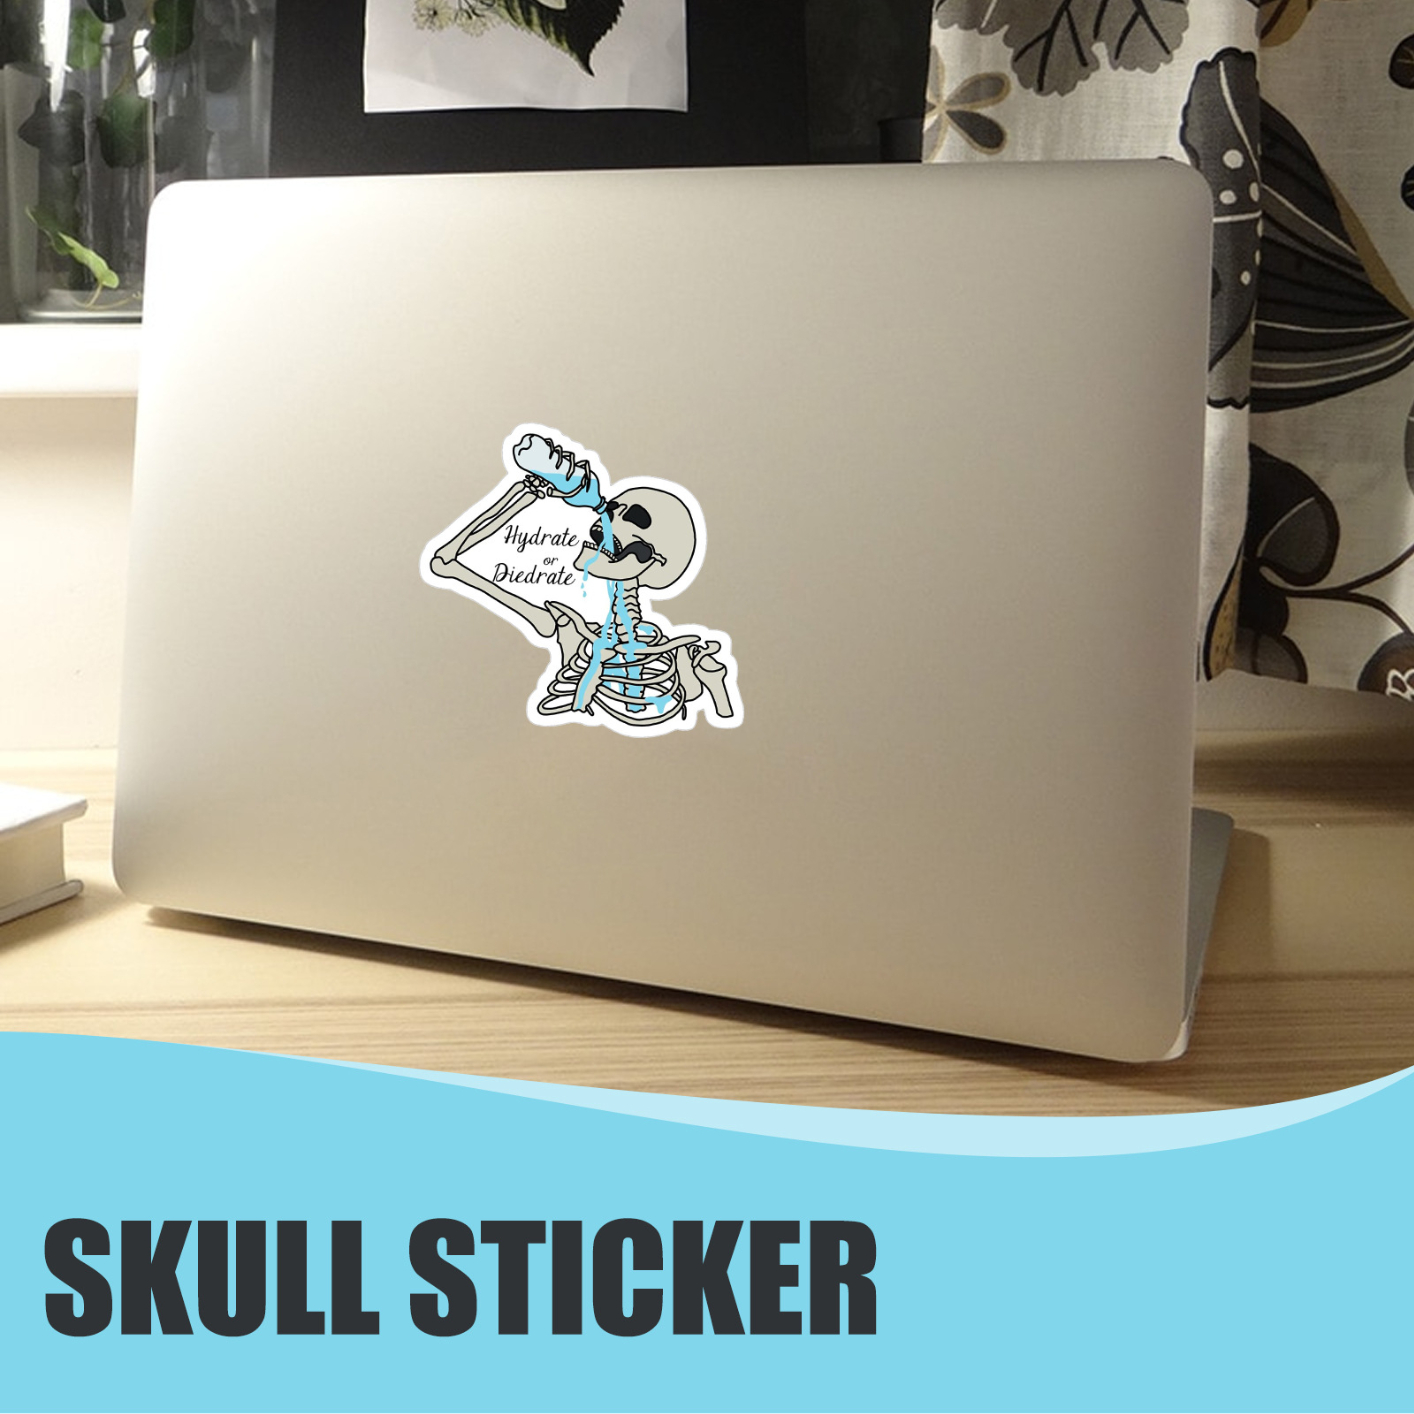 10 pcs Skull Stickers, Fashion Unique Skull Creative Decorative Stickers for Laptop Mobile Phone Water Cup Suitcase